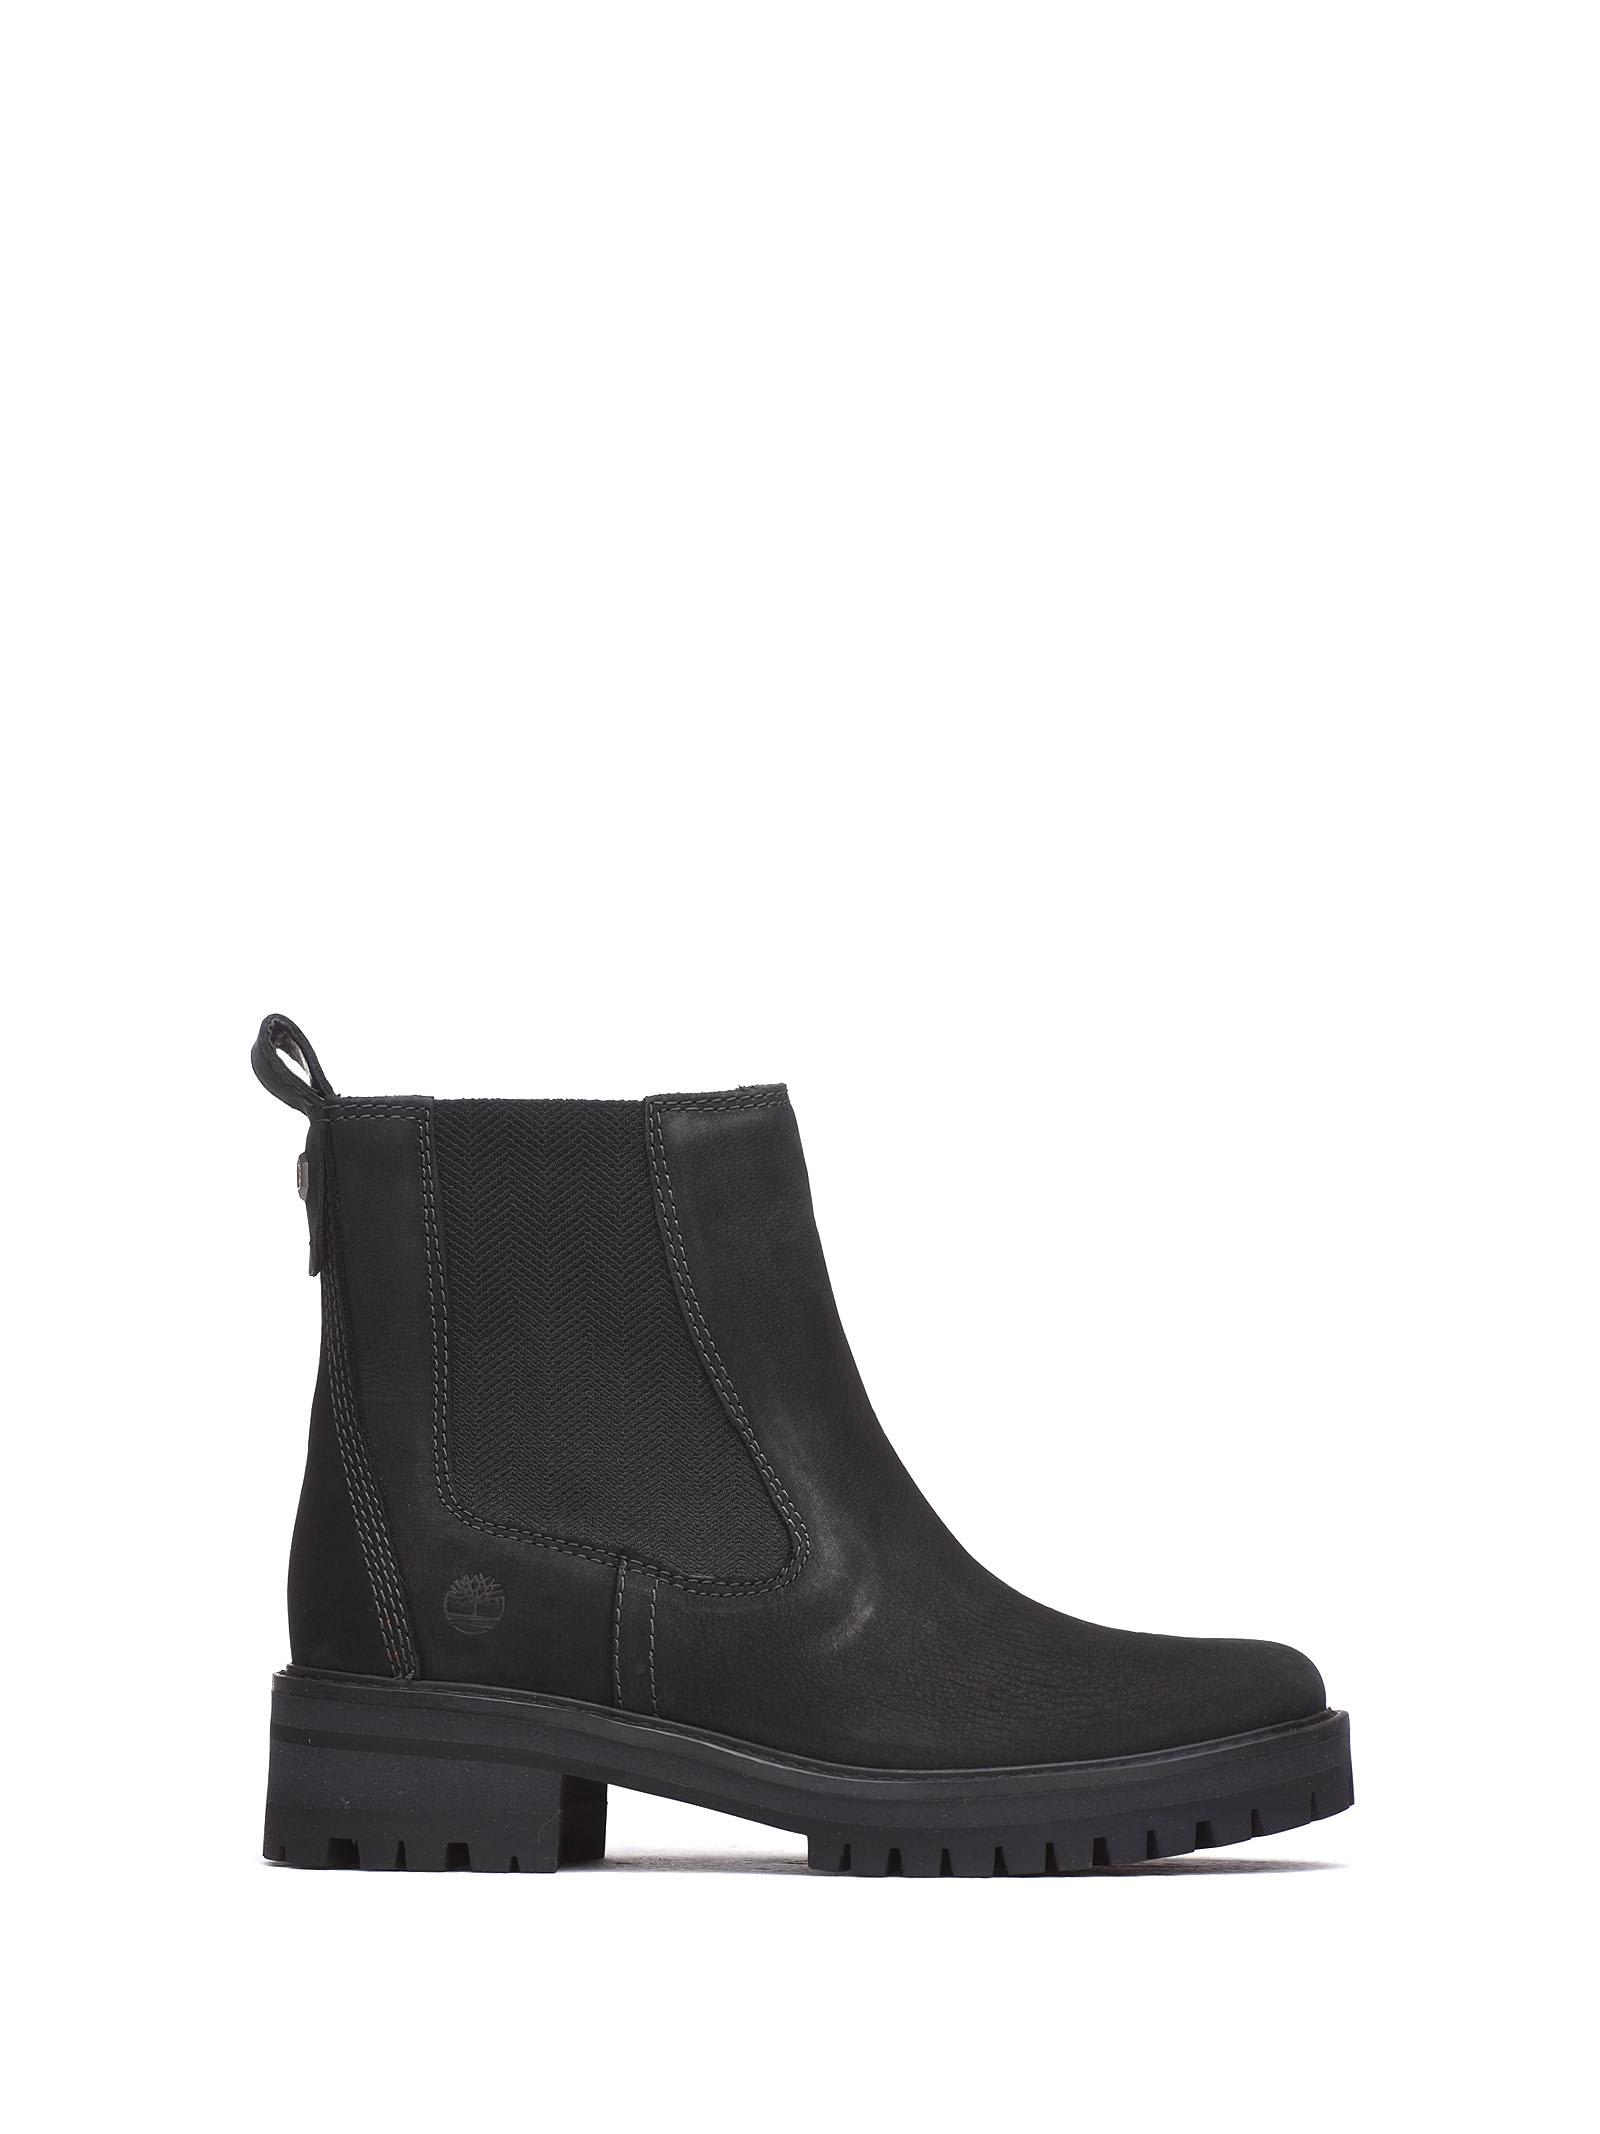 timberland black ankle boots